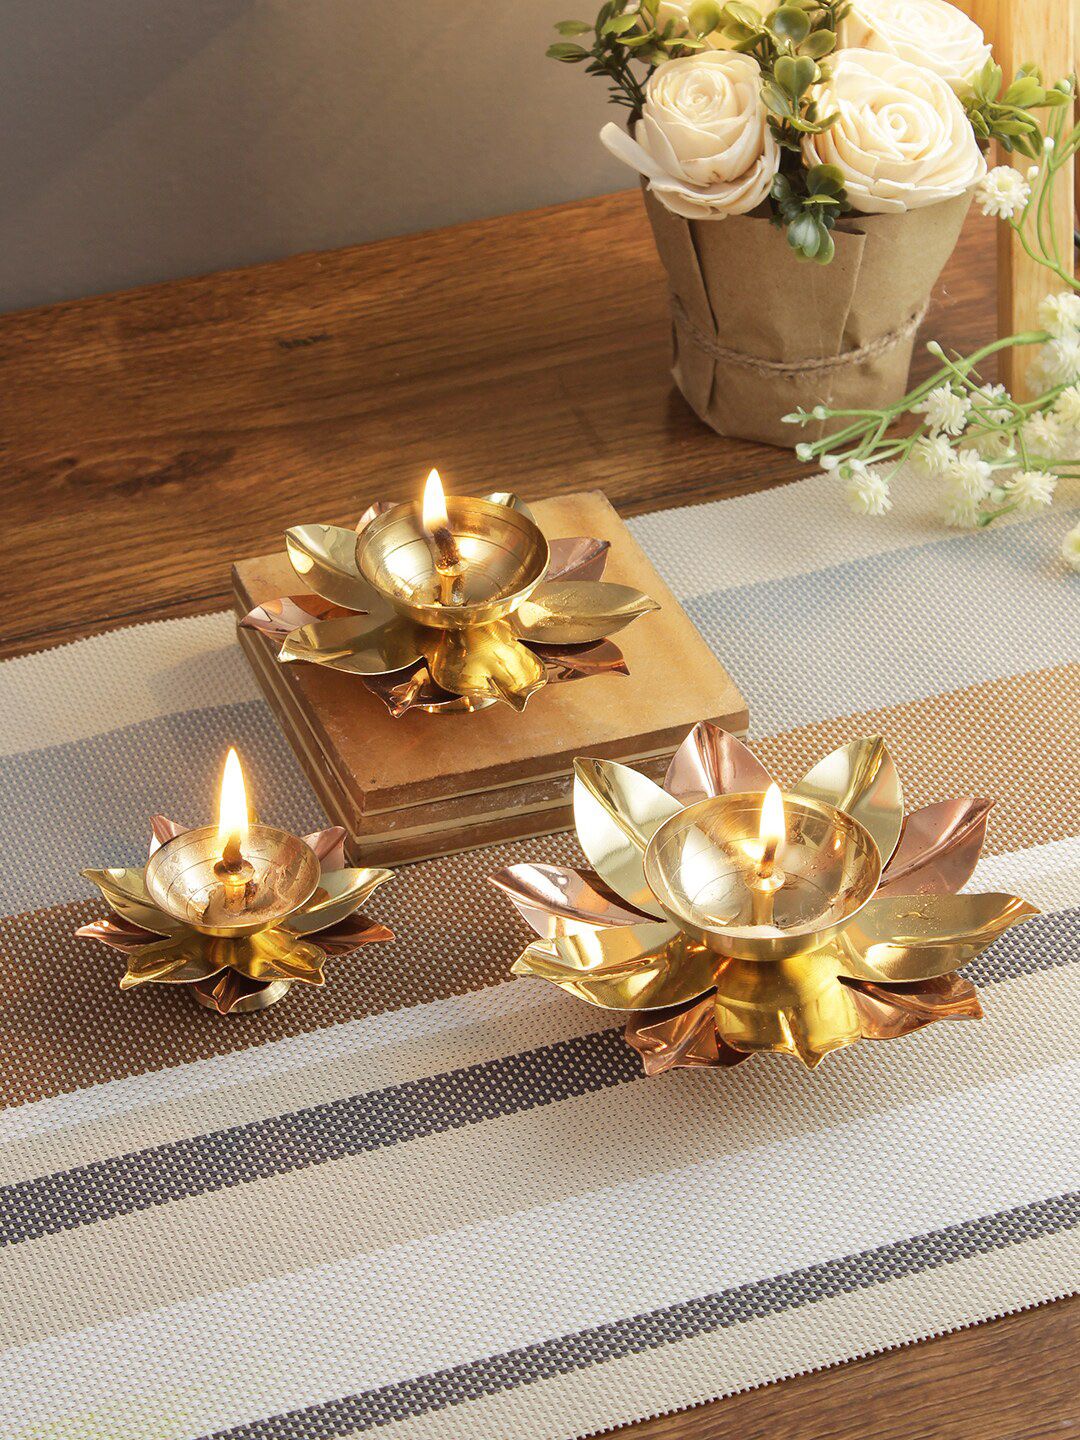 Aapno Rajasthan Set Of 3 Gold-Toned Brass & Copper Dual Tone Diyas Price in India